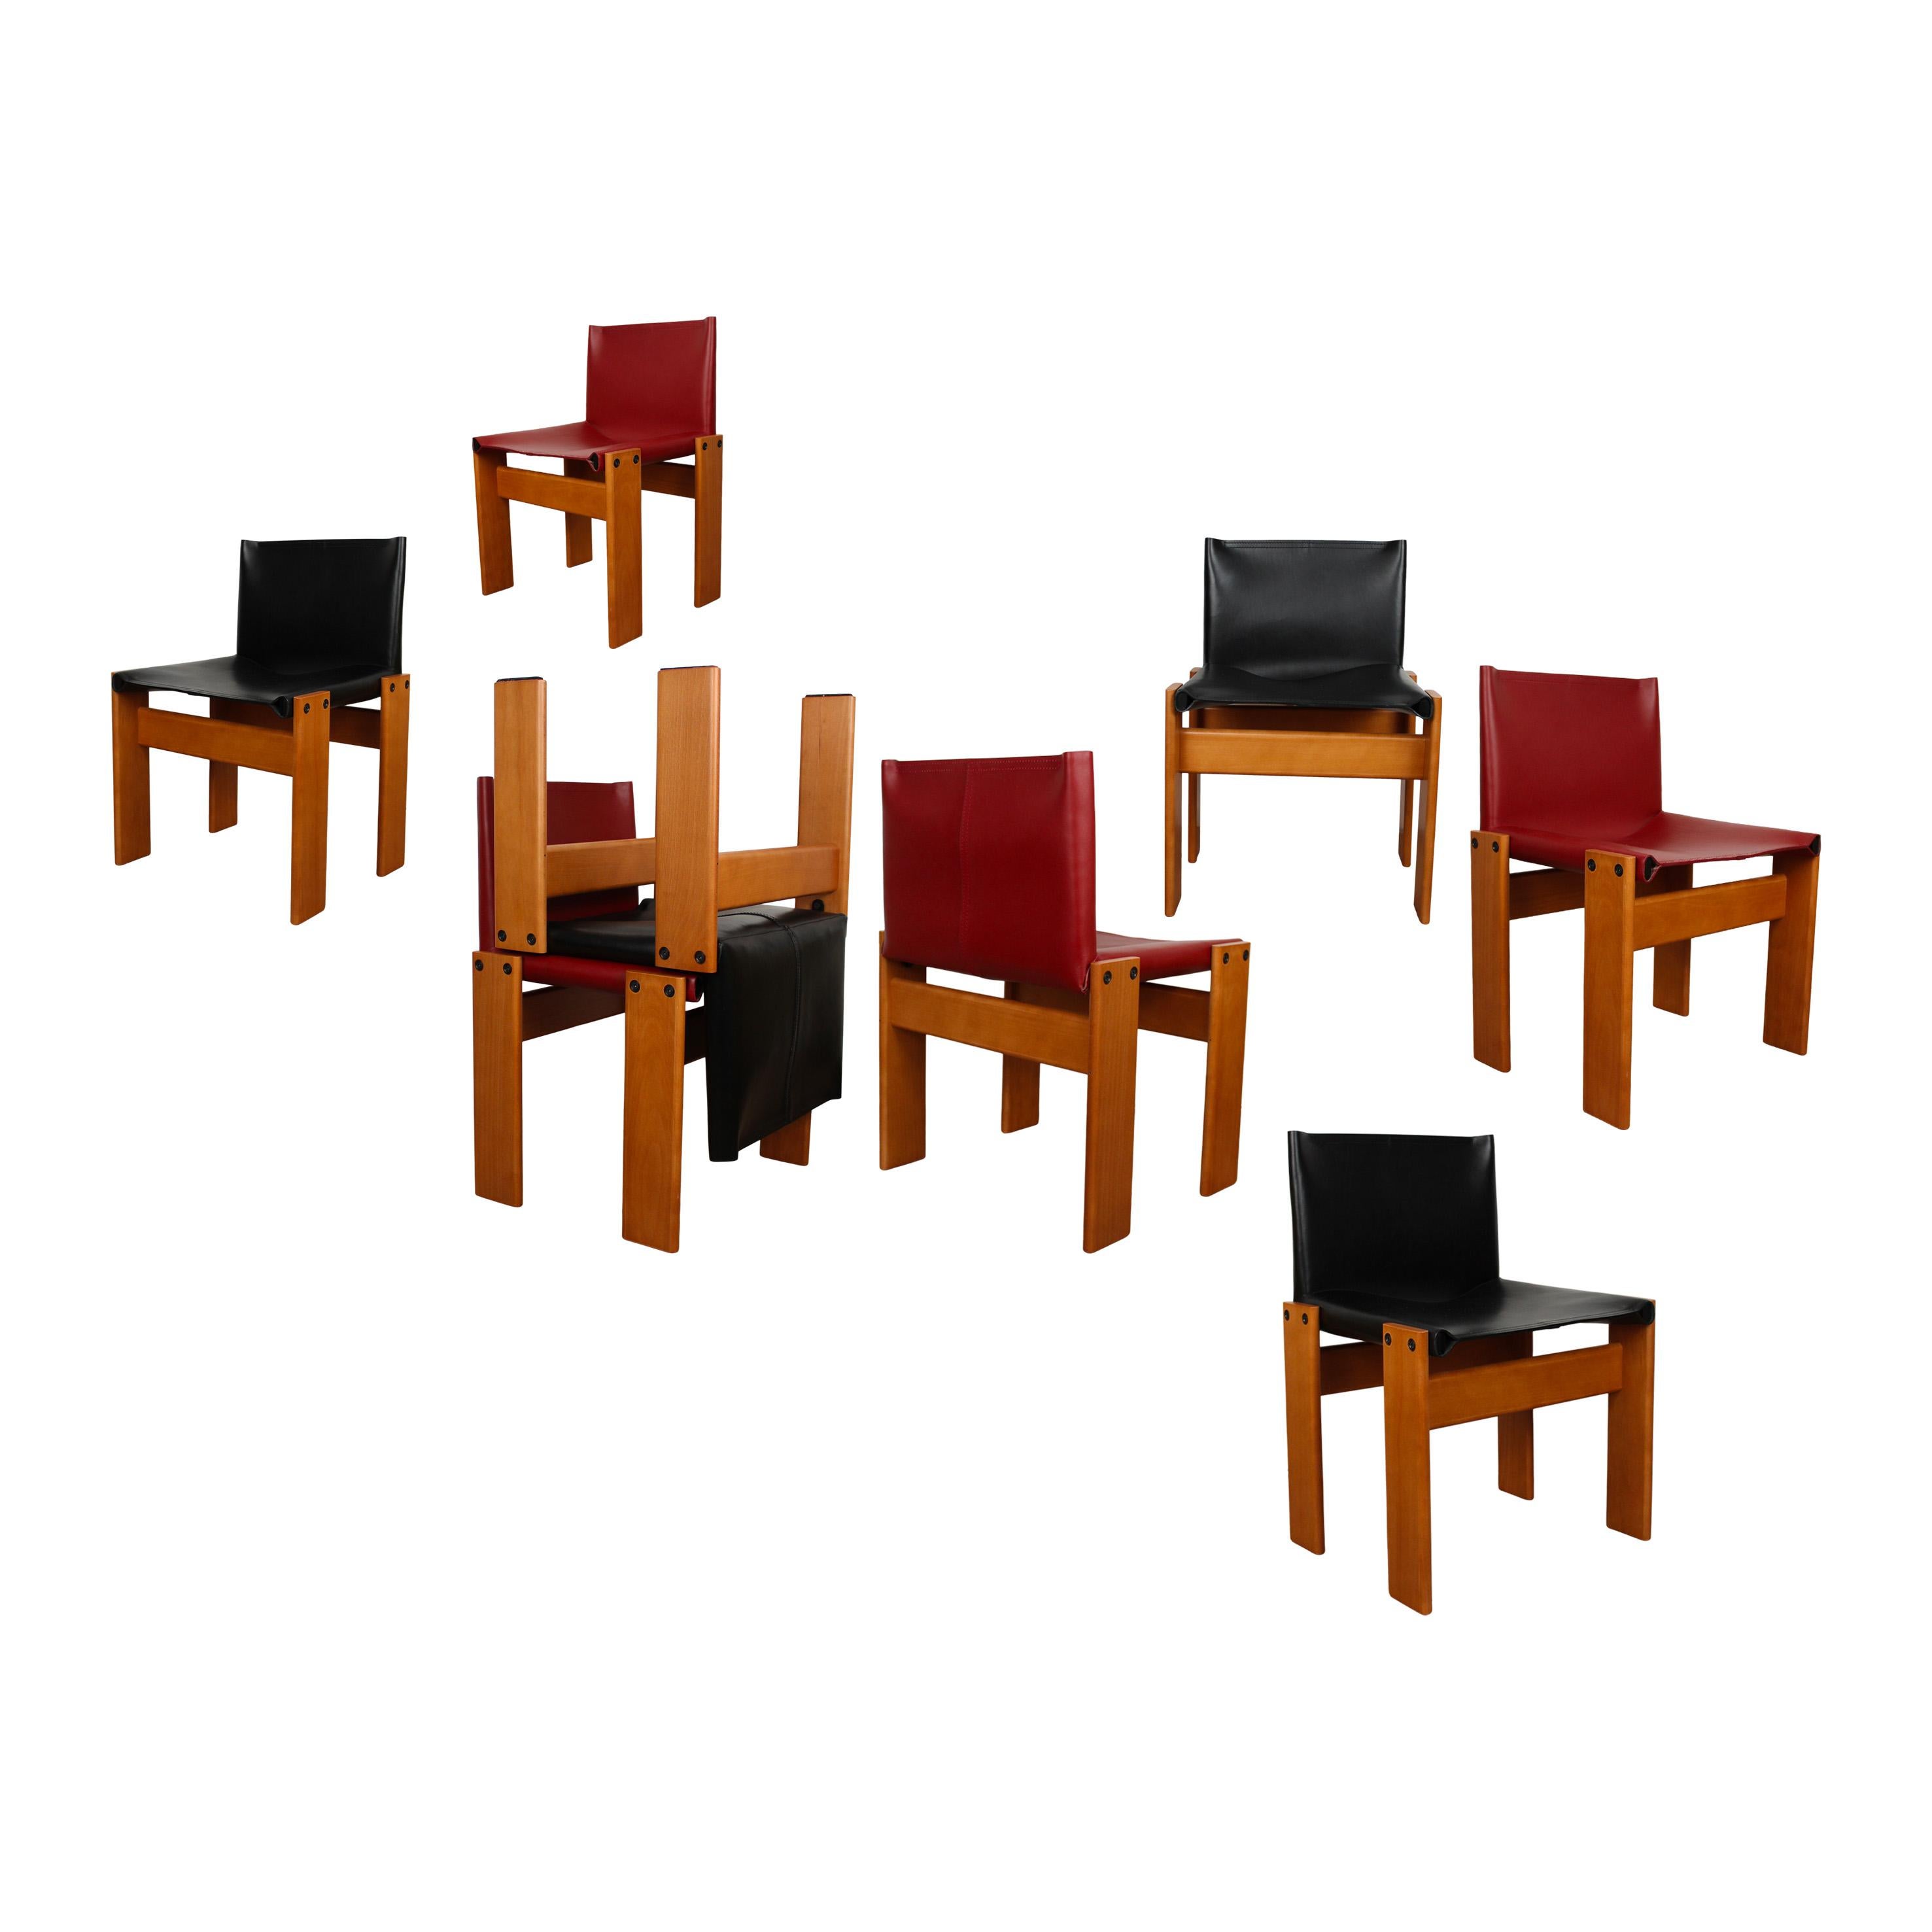 Set of eight “Monk” dining chairs designed by Afra and Tobia Scarpa for Molteni in 1973.
Made of English red and black leather and walnut.
Fully restored in Italy.

Interesting is the ‘flat’ shape of this chair where the designer has chosen to place